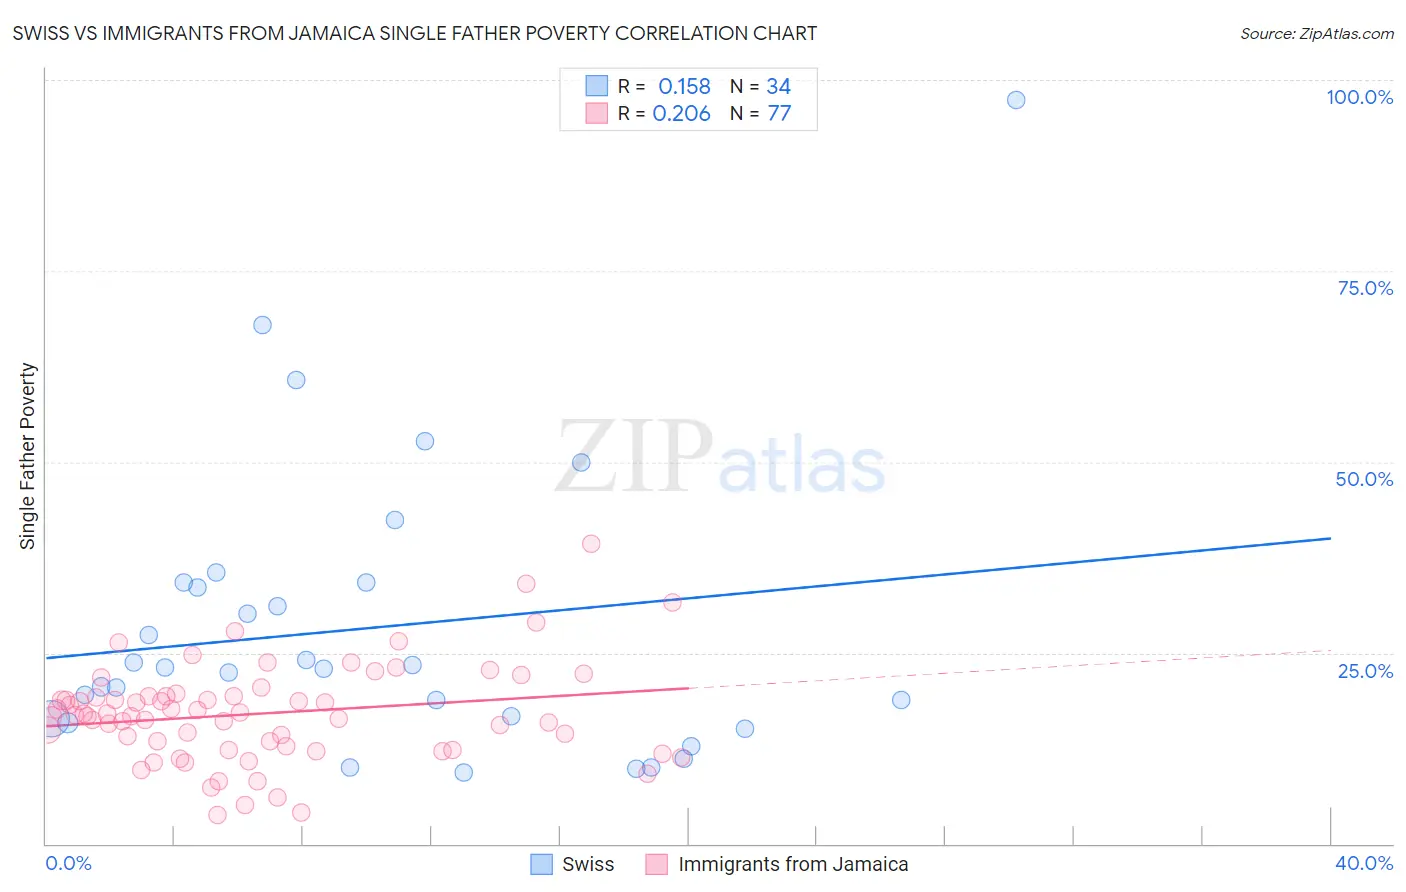 Swiss vs Immigrants from Jamaica Single Father Poverty